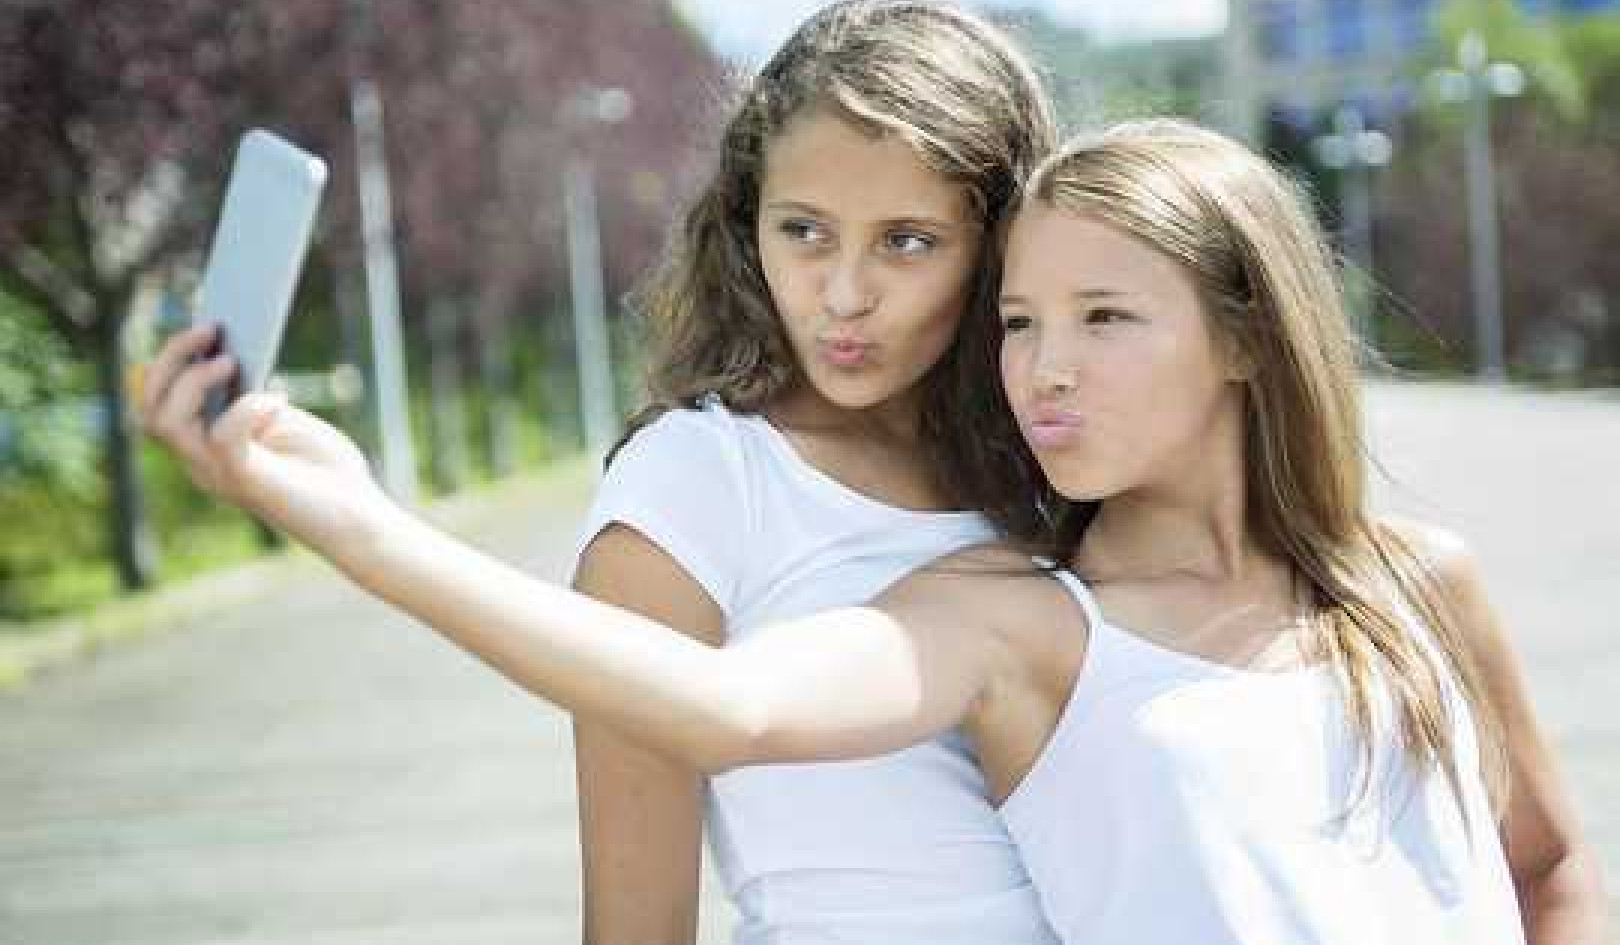 How Taking Selfies Can Take You Out Of The Moment